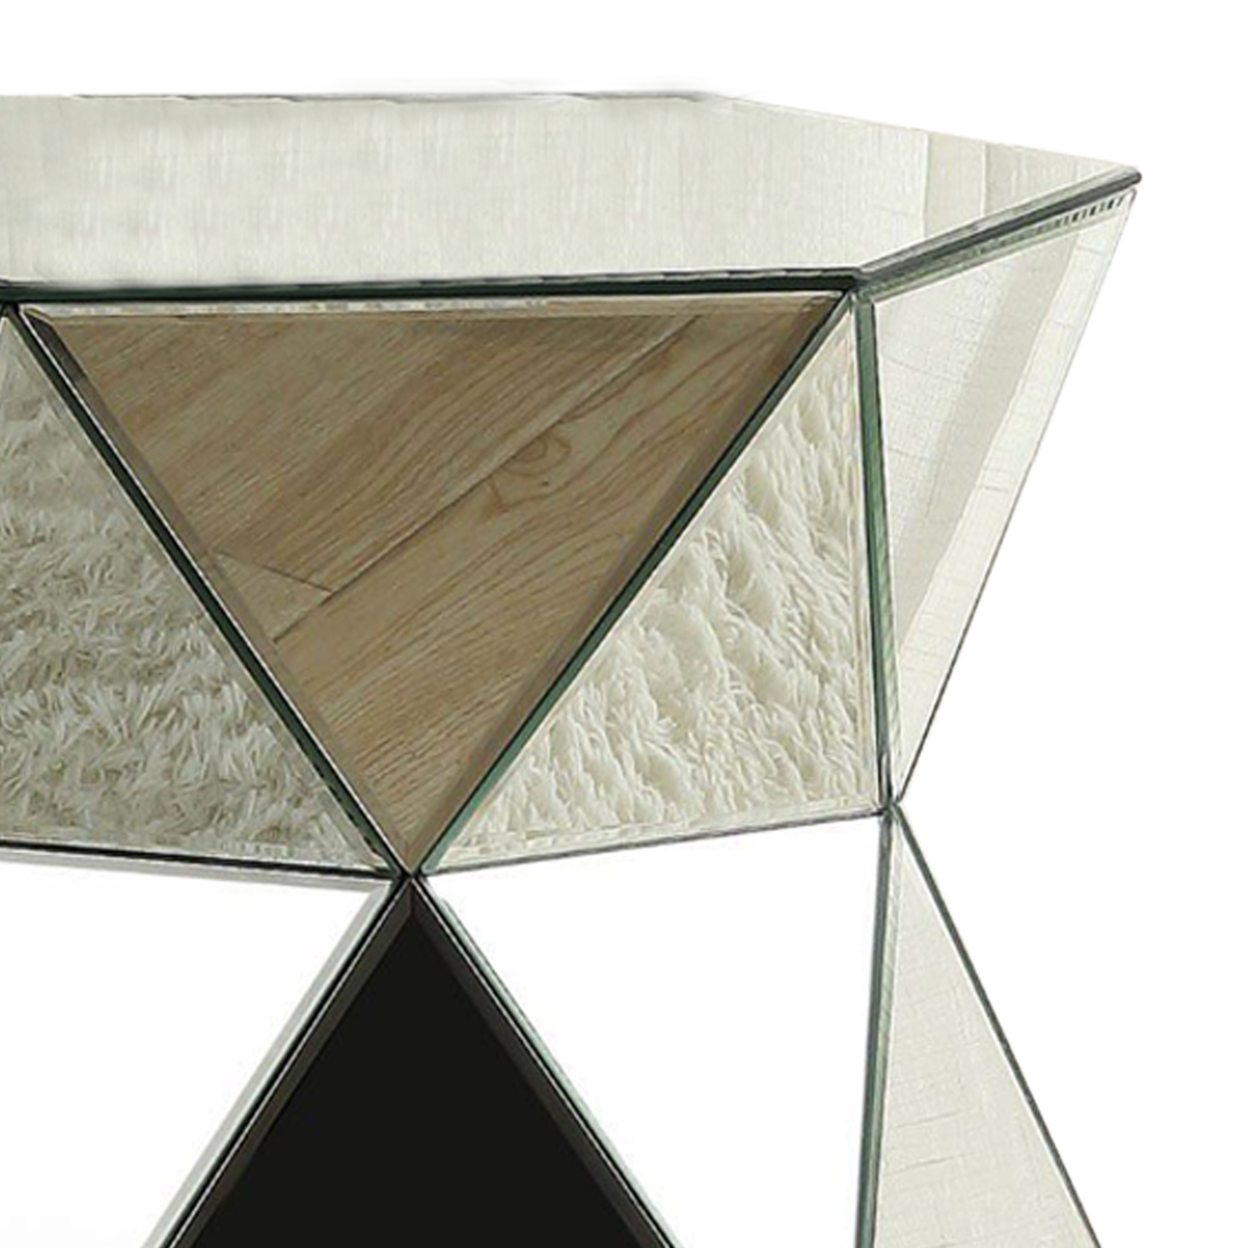 Mirrored Pedestal With Geometric Design And Faceted Sides, Silver- Saltoro Sherpi